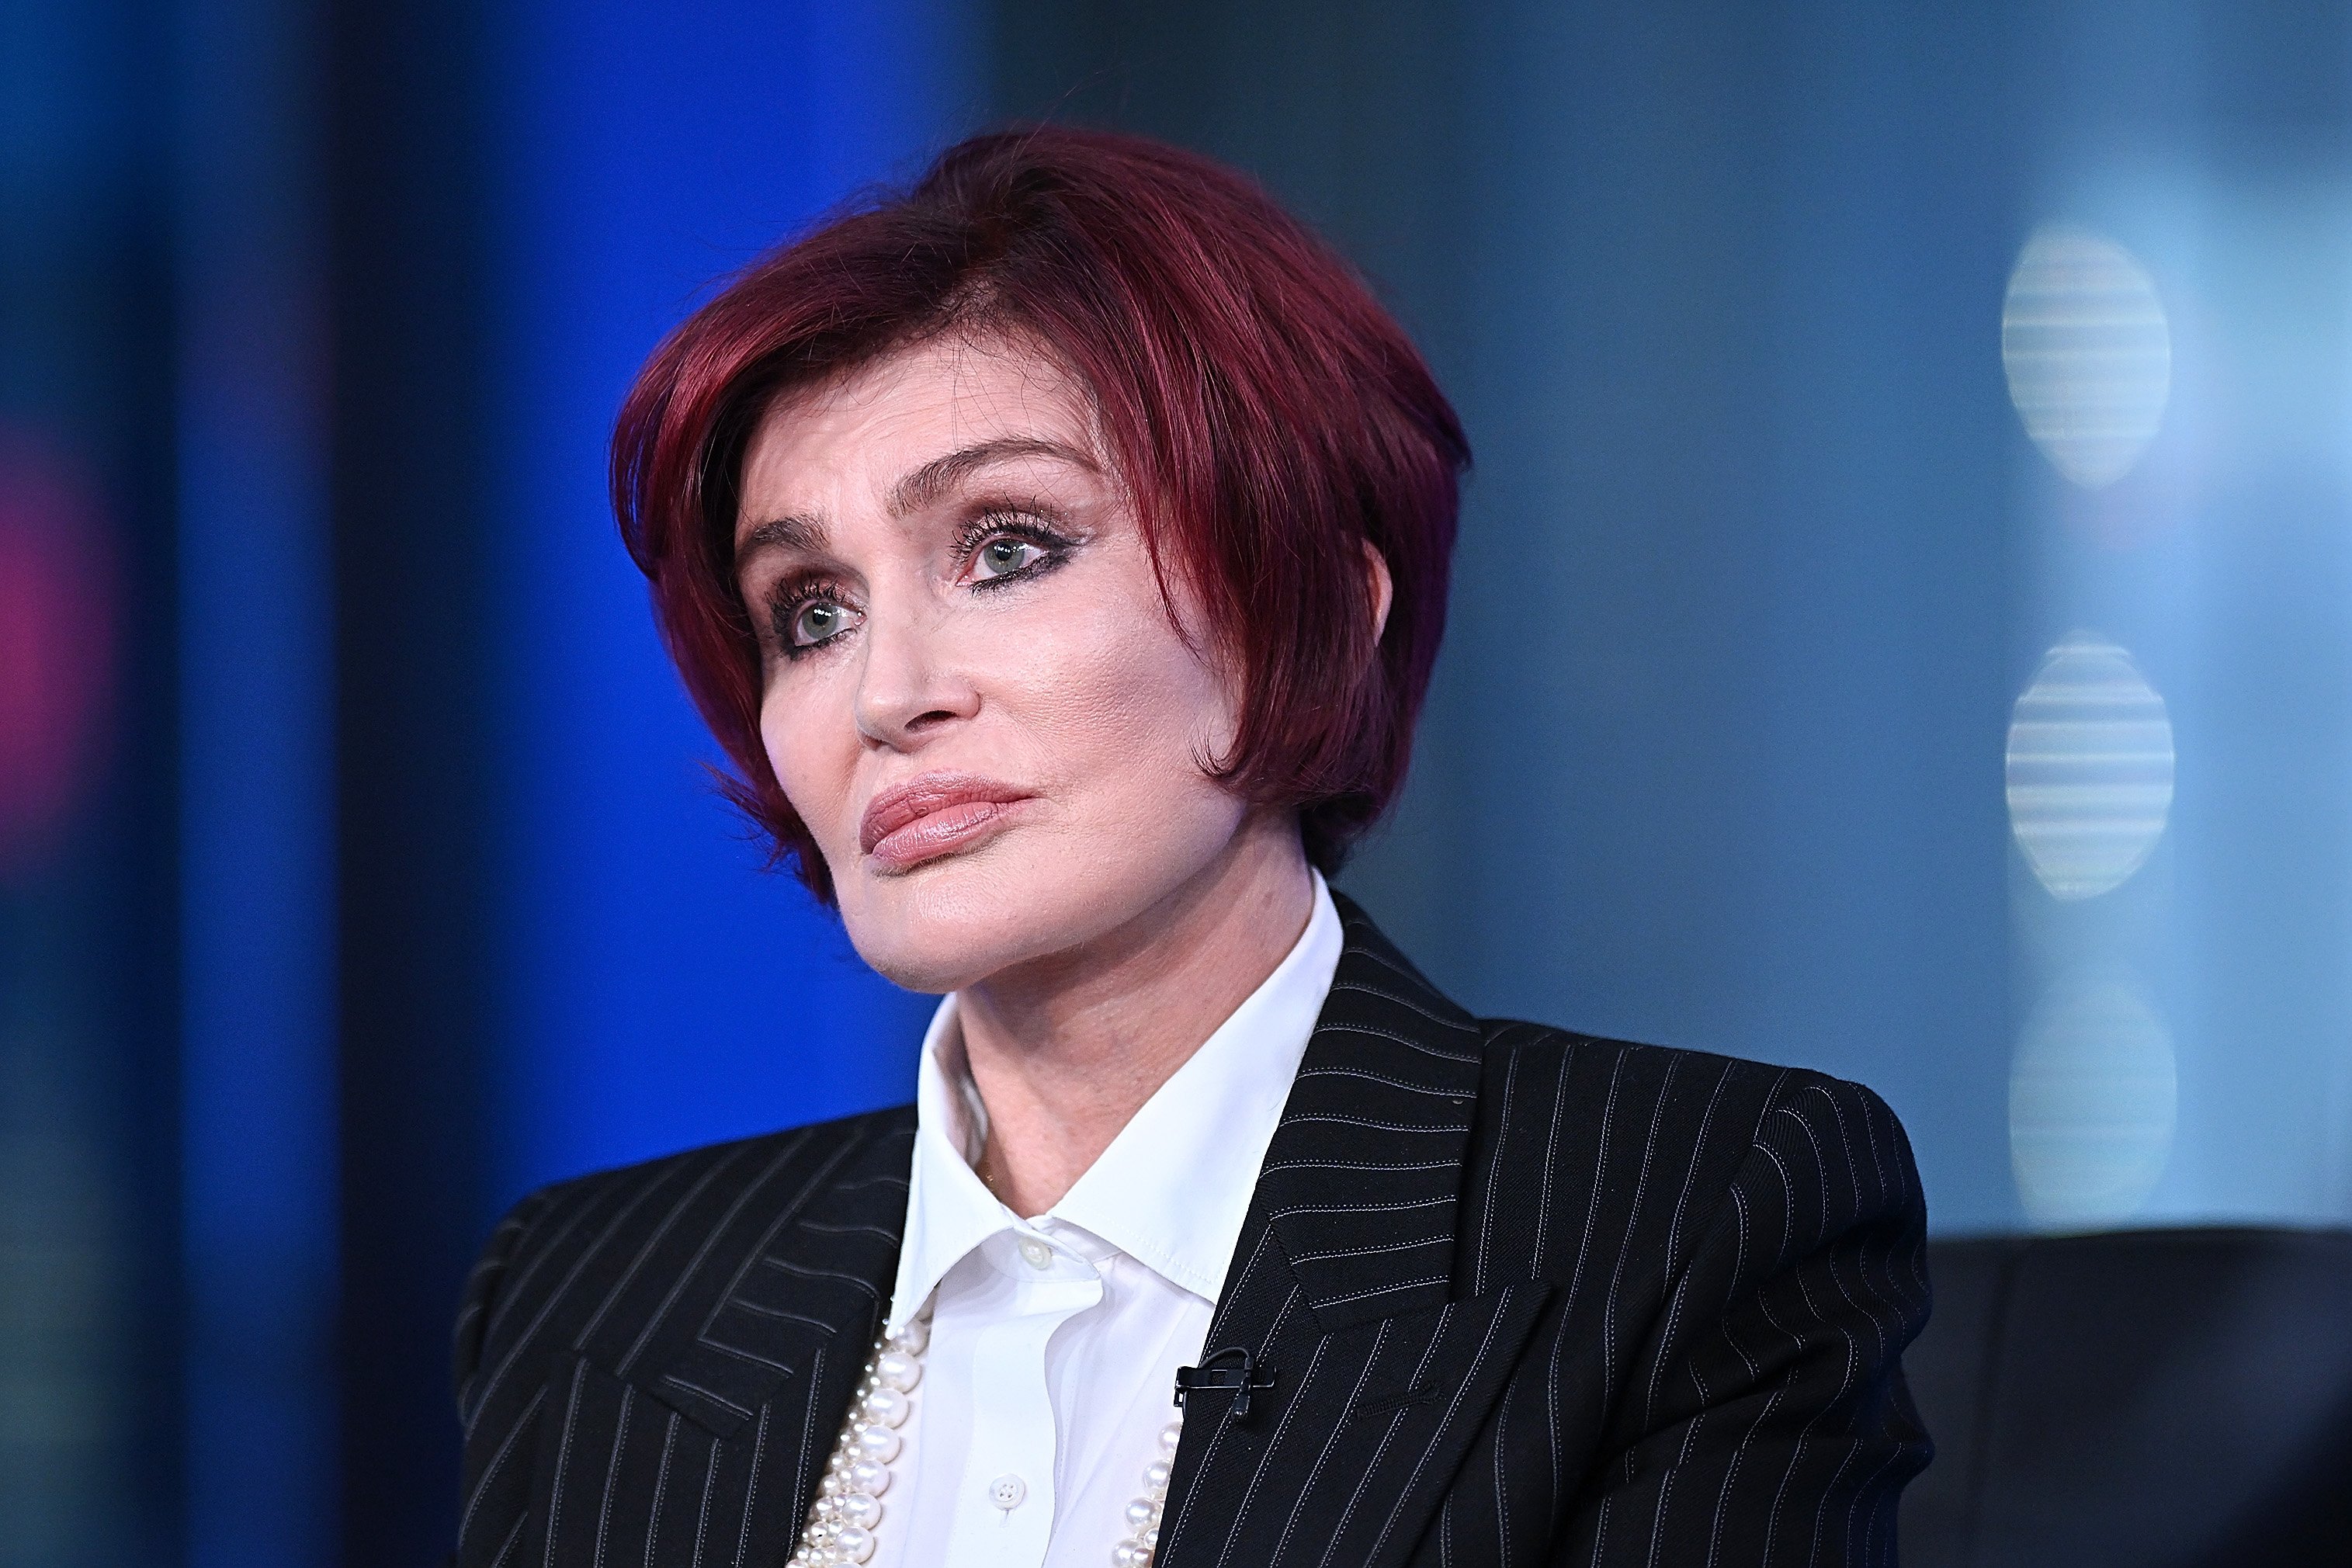 Sharon Osbourne discusses her new FOX Nation series “Sharon Osbourne: To Hell & Back” on “The Five” at FOX News Channel Studios at FOX Studios on September 27, 2022 in New York City | Source: Getty Images 